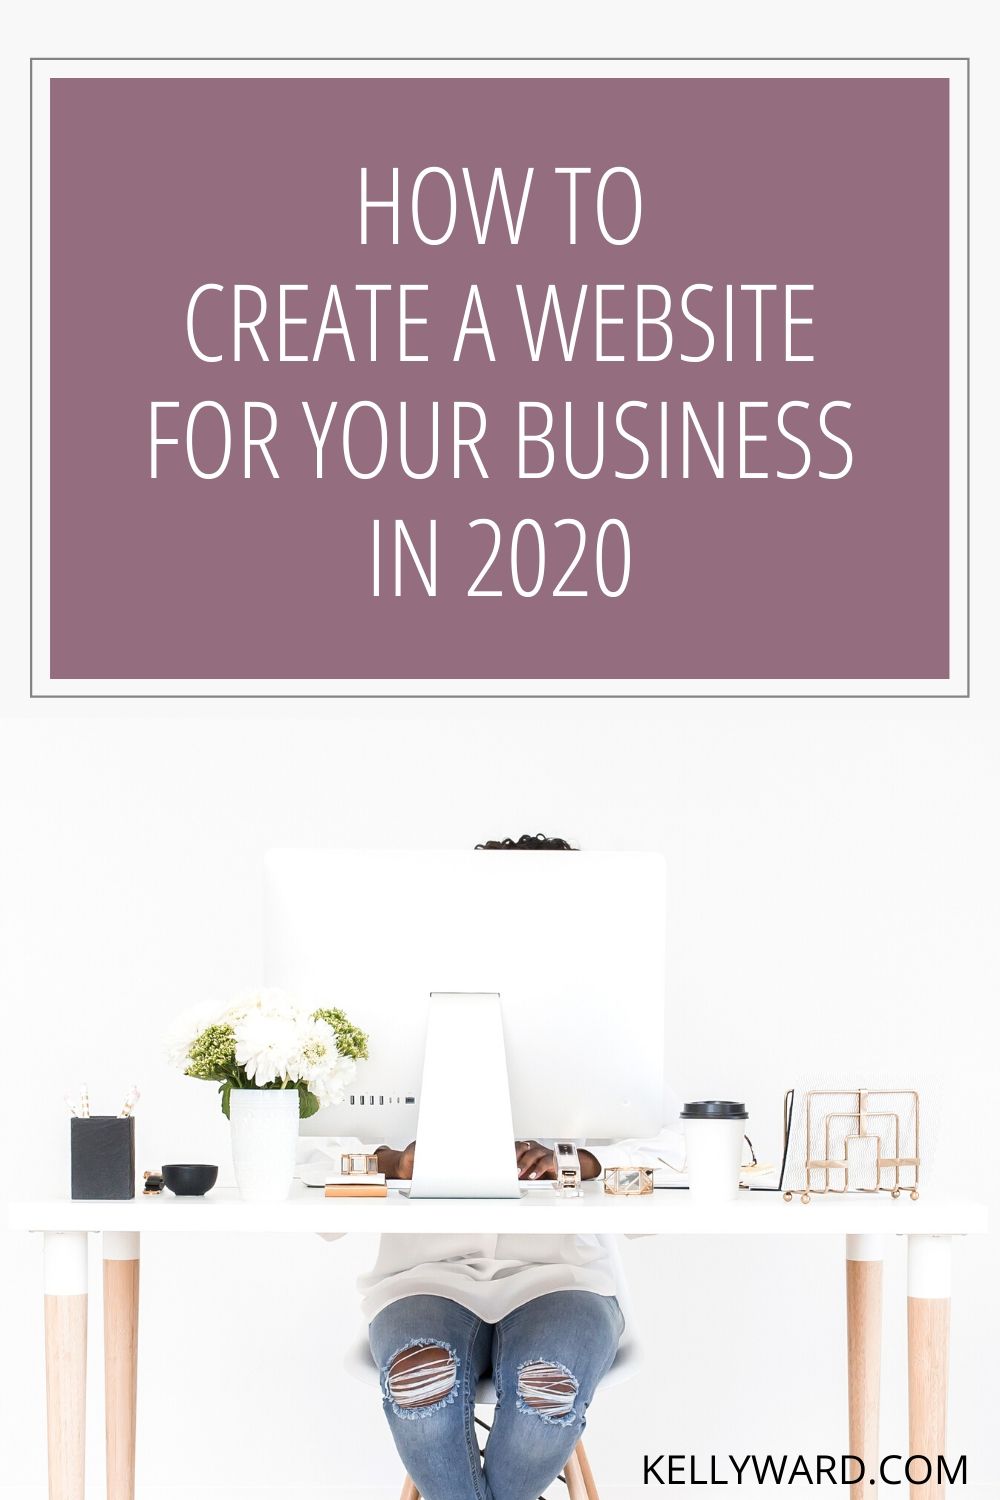 How to Create a Website for your Business